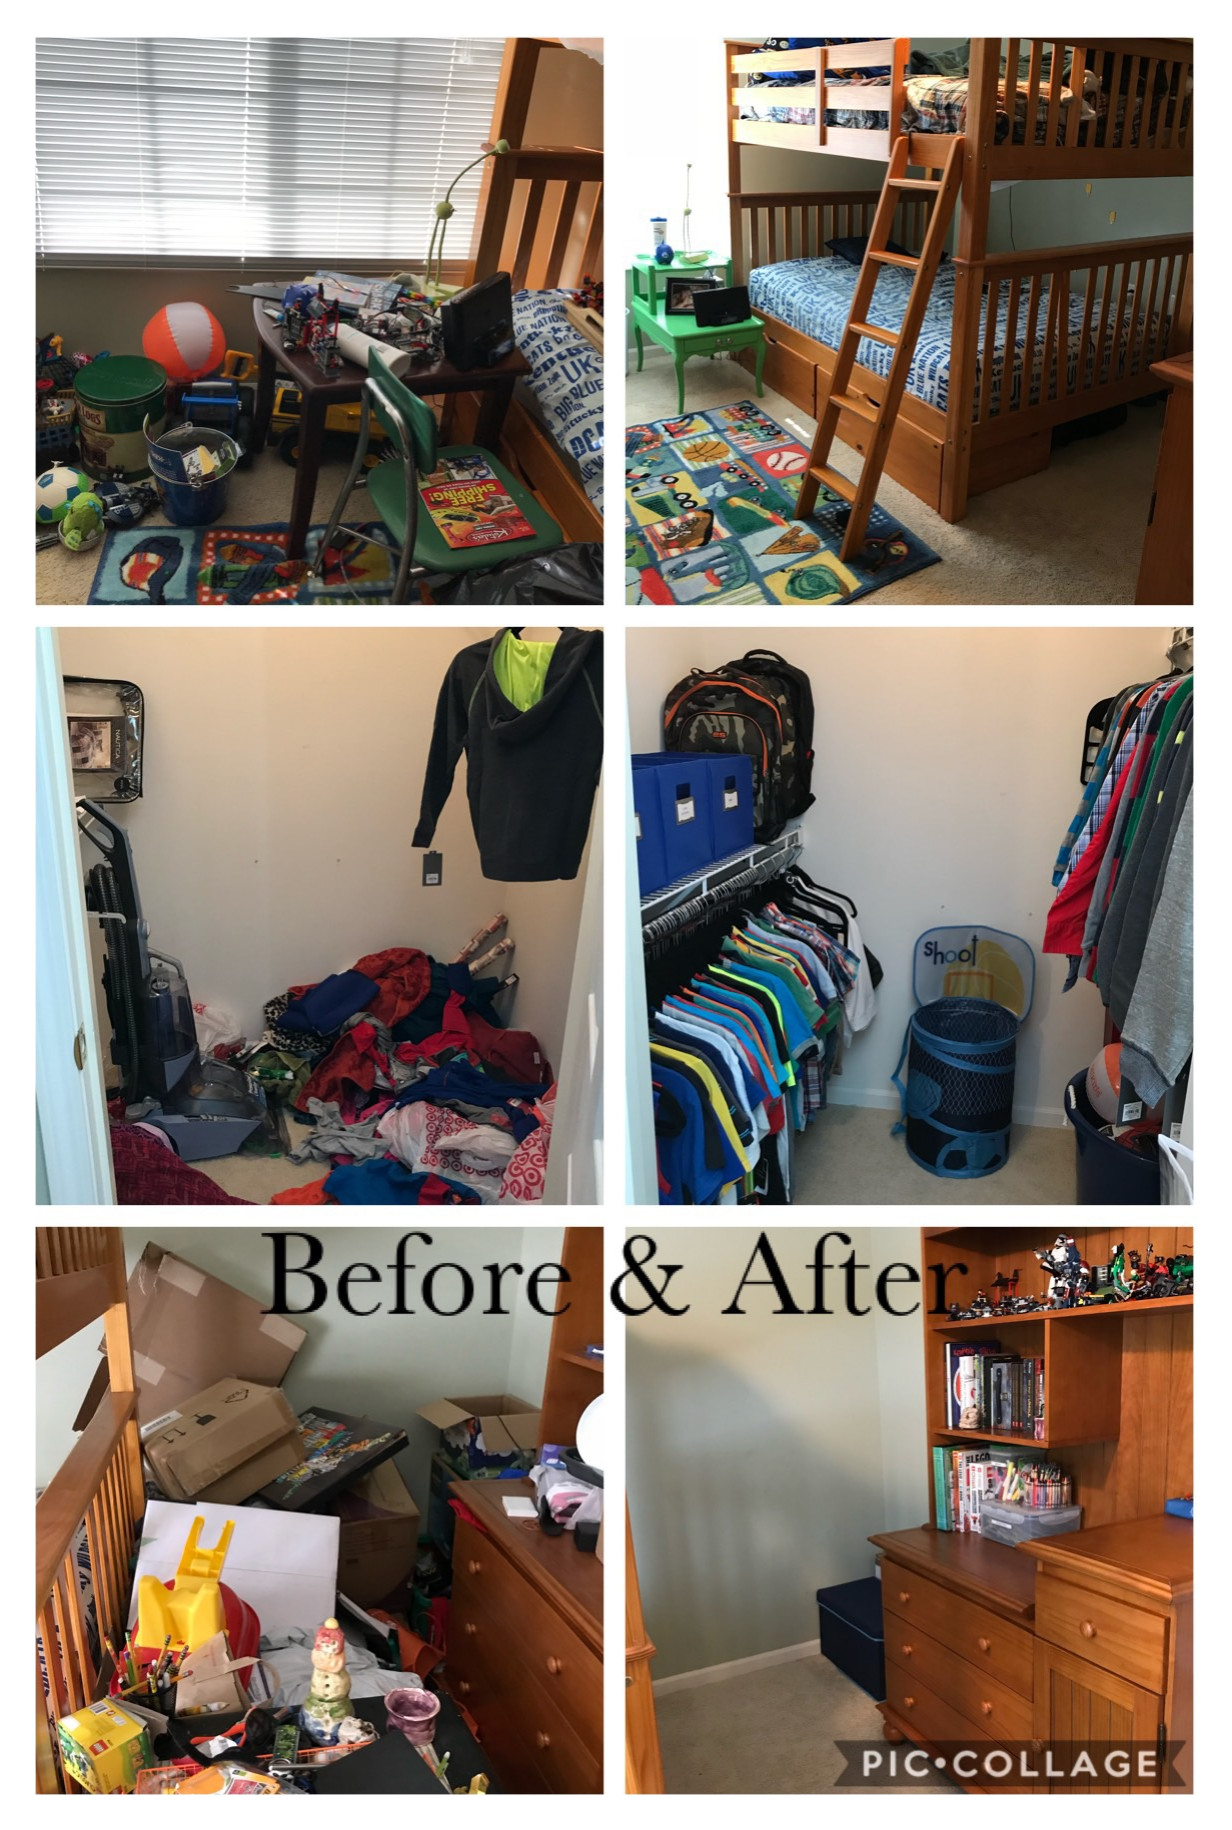 Child's room and closet before and after